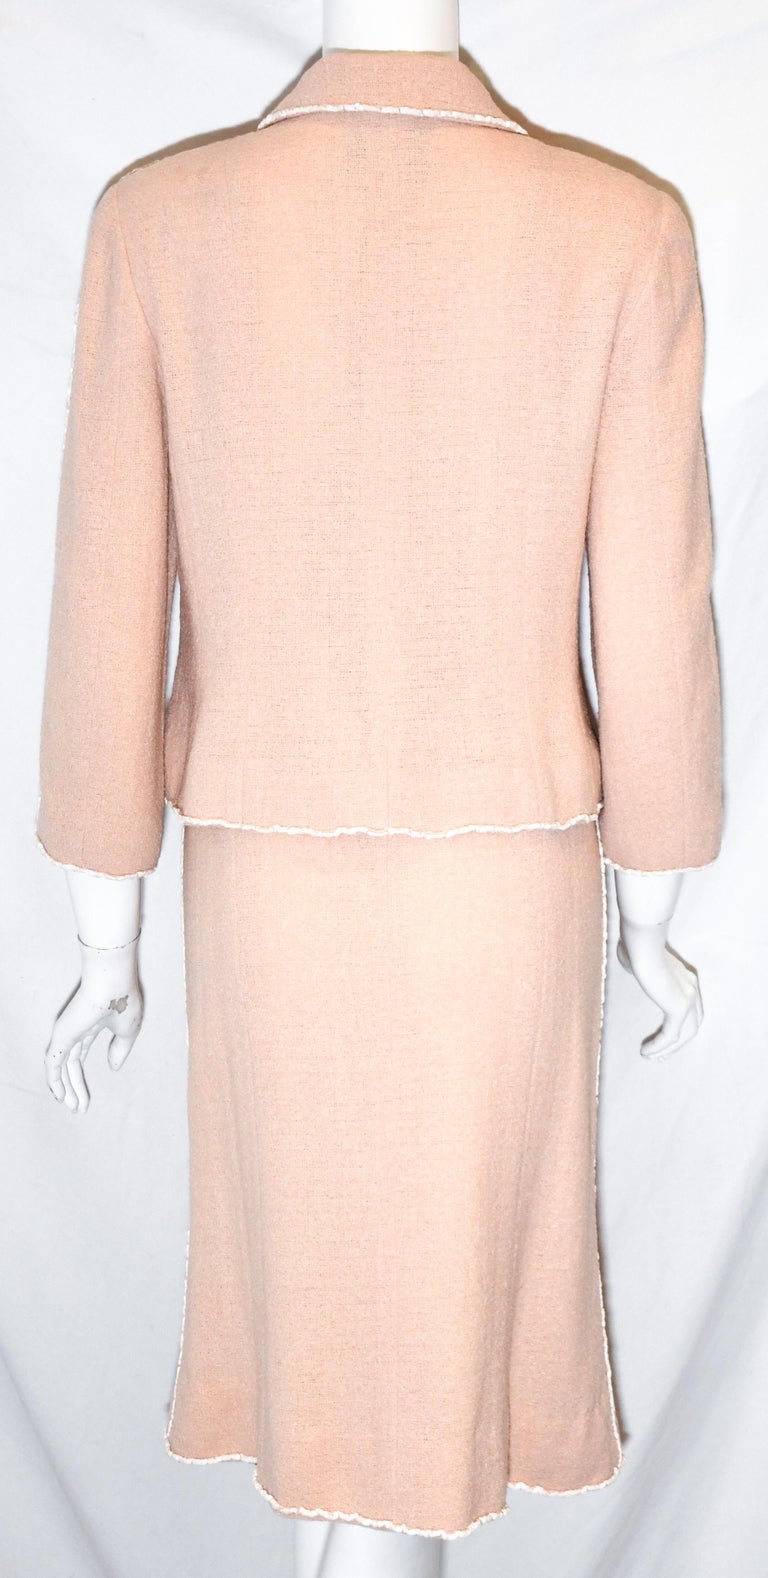 Chanel Peach Wool Blend Skirt Suit with White Trim For Sale at 1stdibs